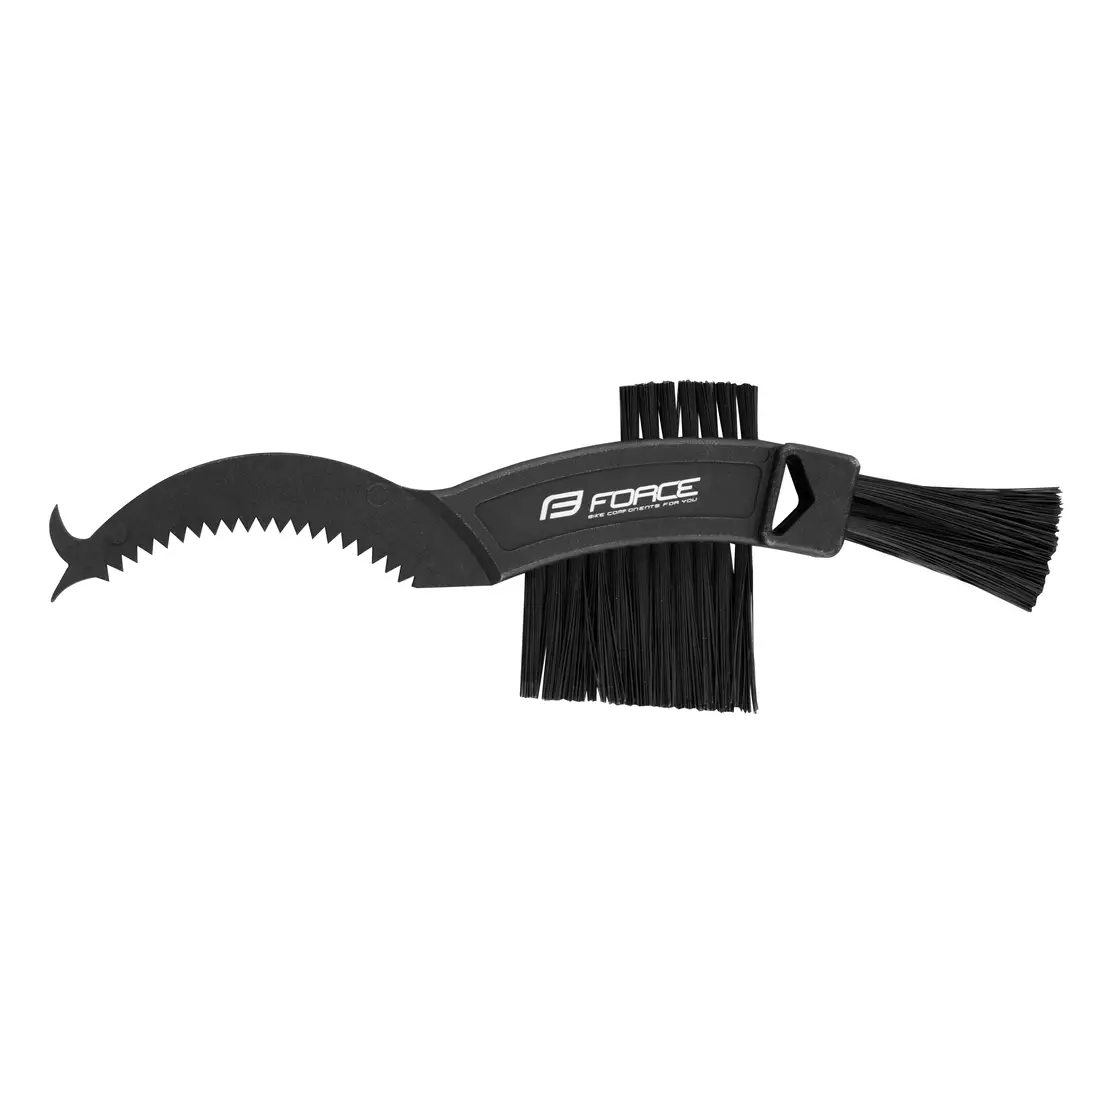 FORCE brush for cleaning bicycle parts CLEAN 89459